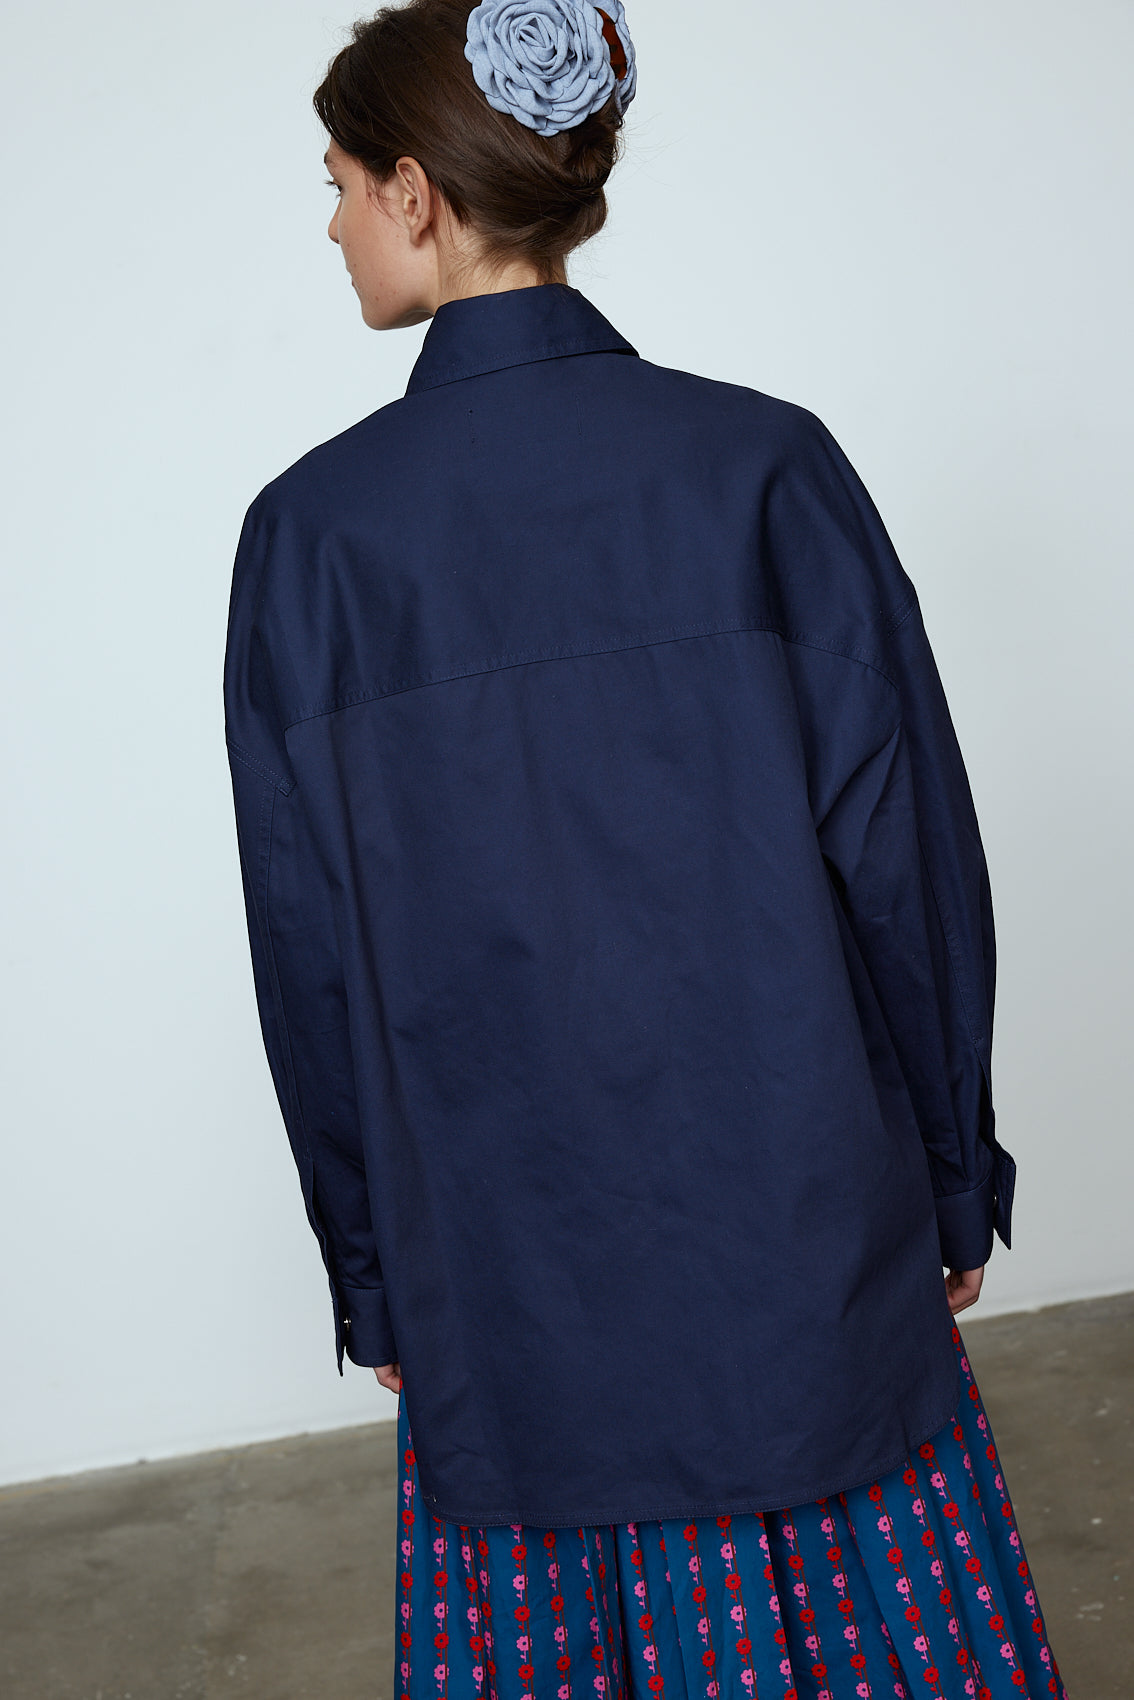 The Frederik Shirt is an oversized cotton style with big sleeves, green pockets, and an embroidered Caro logo on the front.  Style it open over a dress, tank top, or t-shirt or buttoned up on its own.  Material: 100% cotton.  The model is 179cm (5'10") and wears size S.